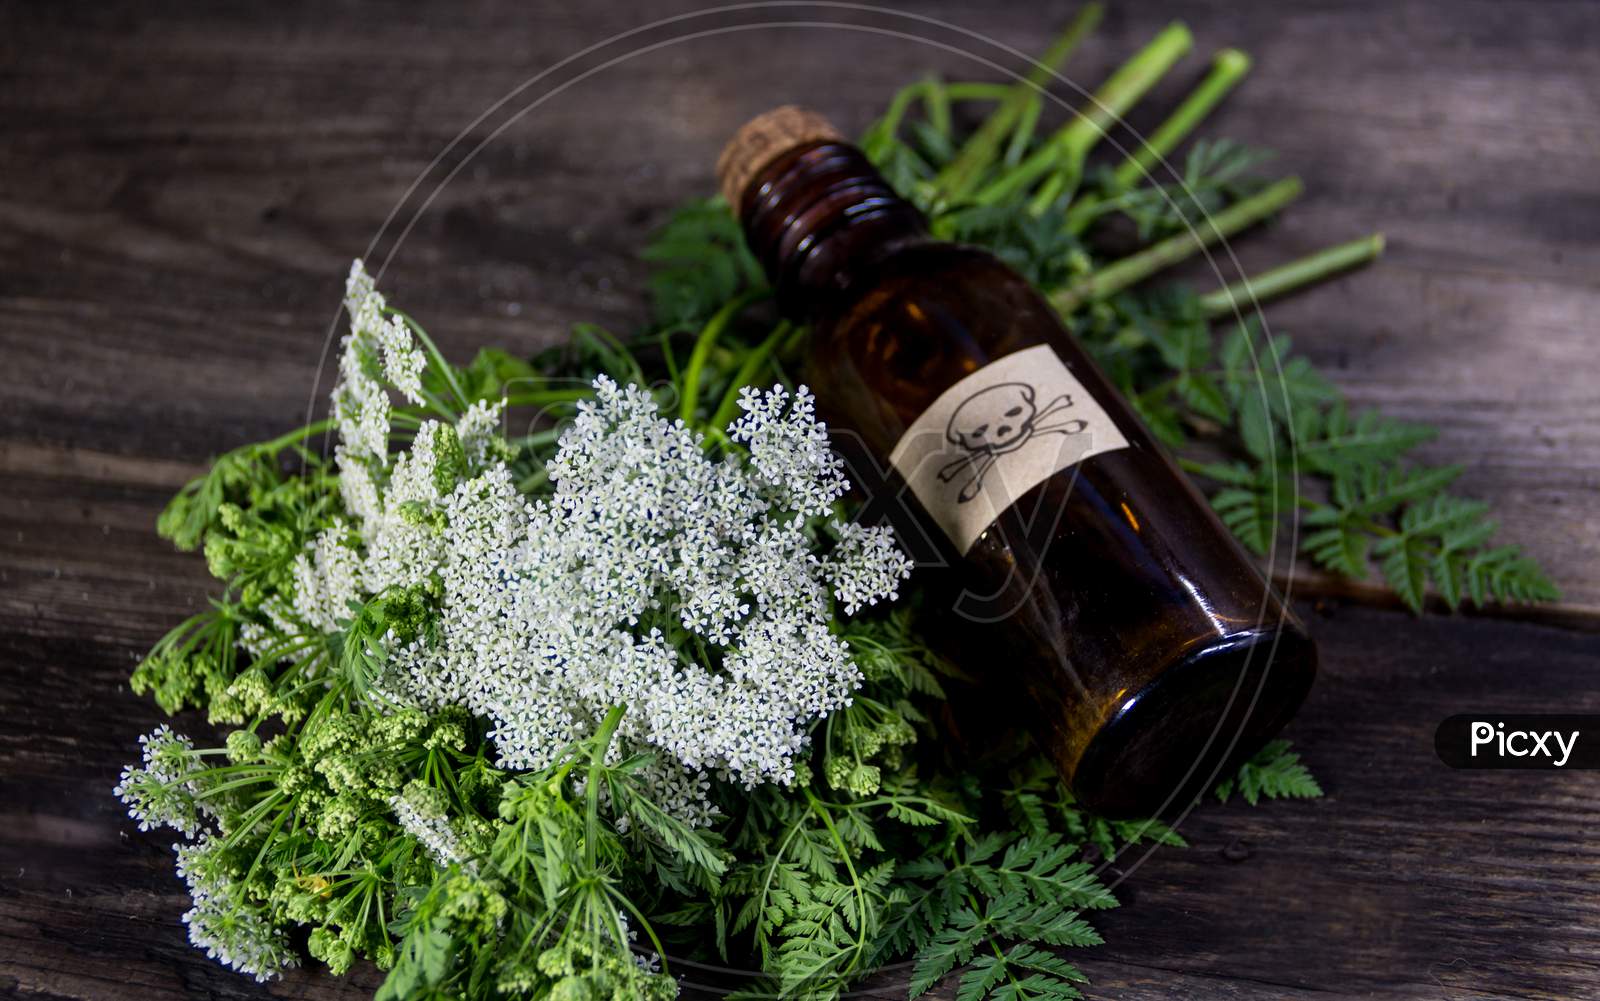 Hemlock Flower Bouquet With A Vial Of Poison